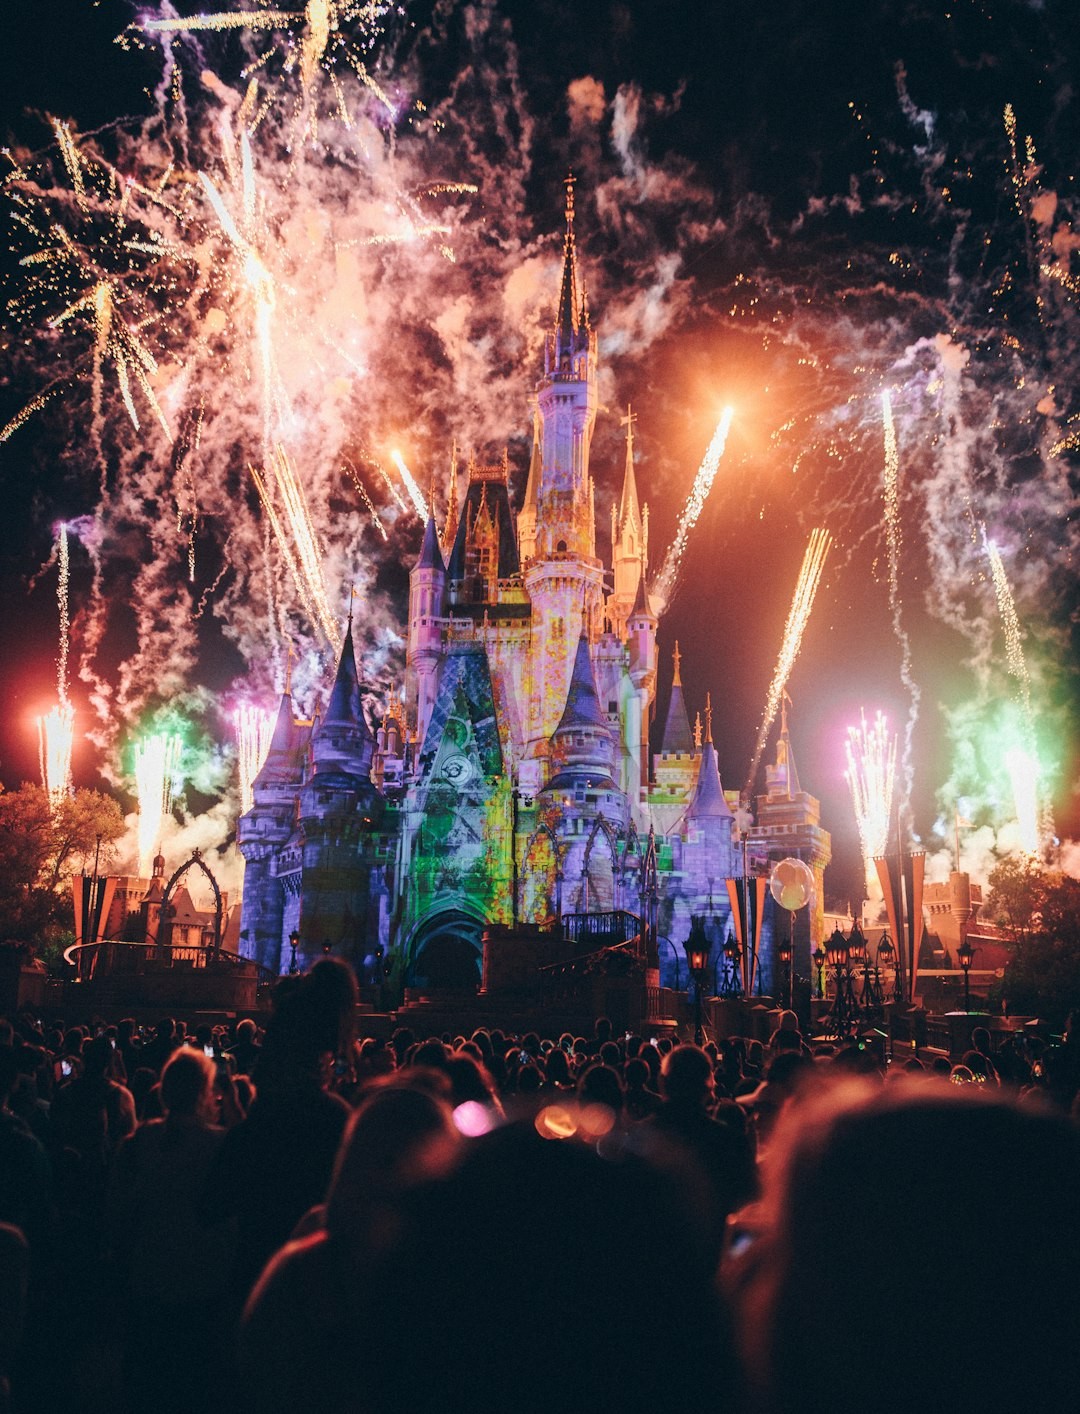 Come with us to Disney World